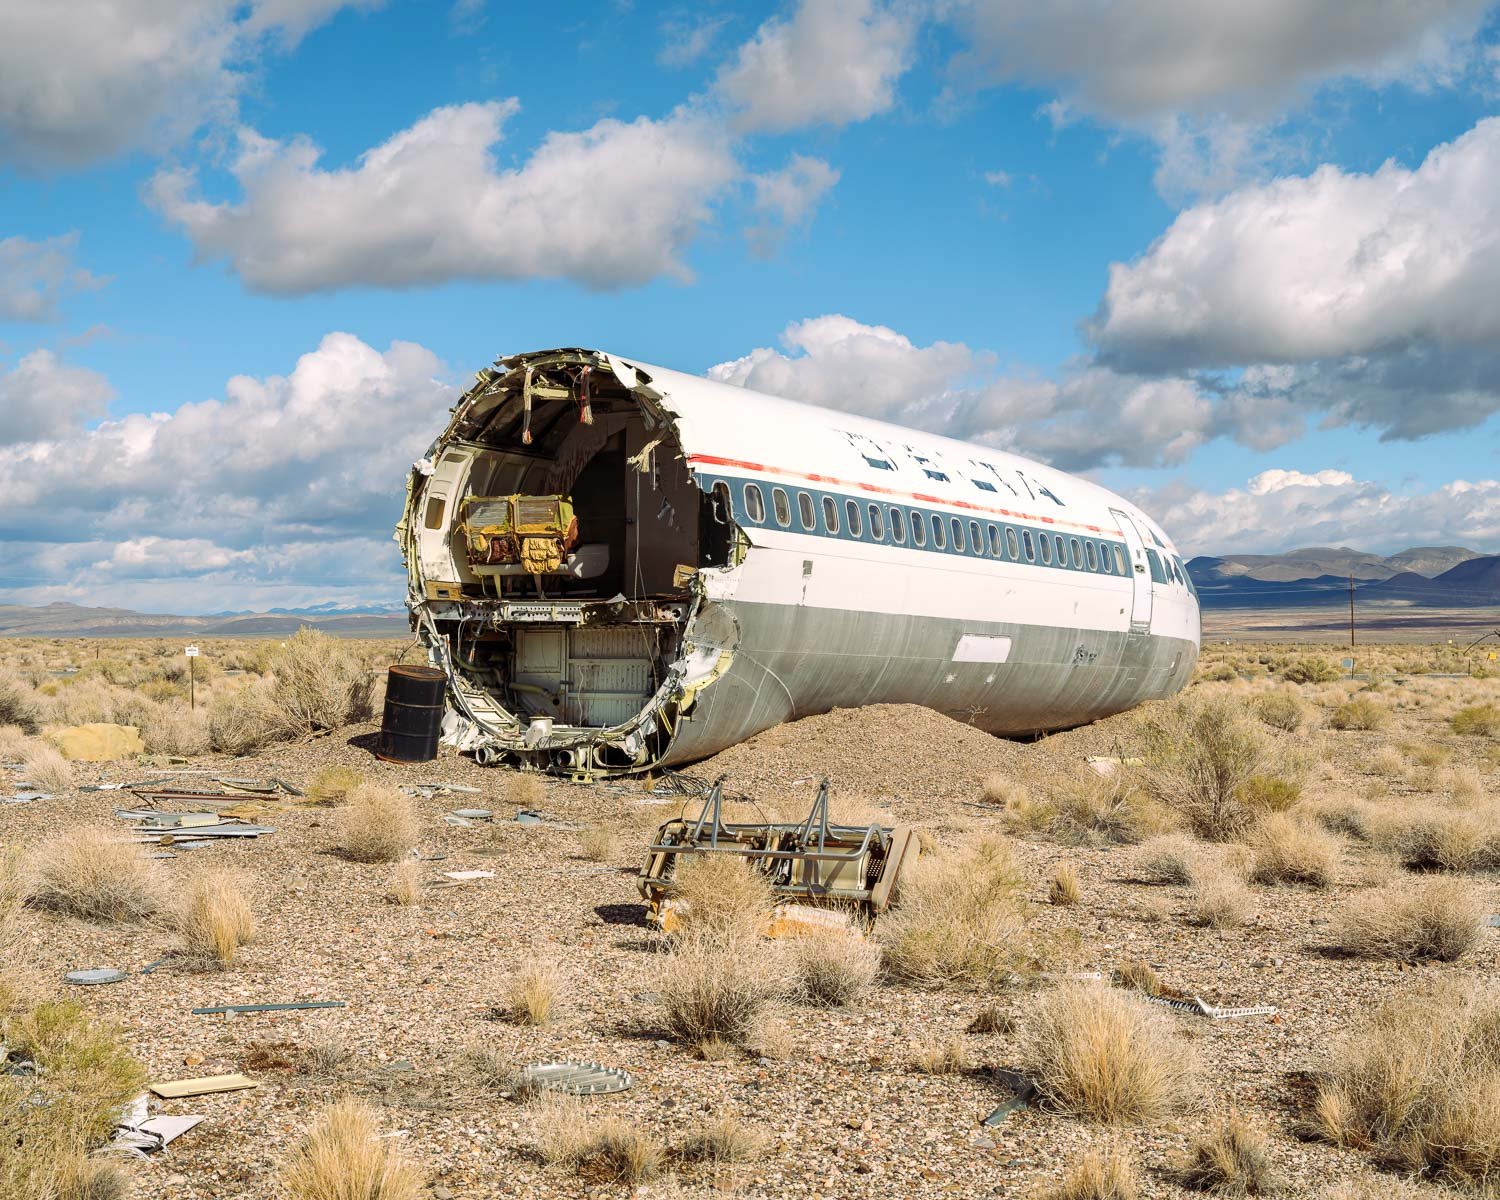  Crashed aircraft at the nuclear WMD training site (T1)  